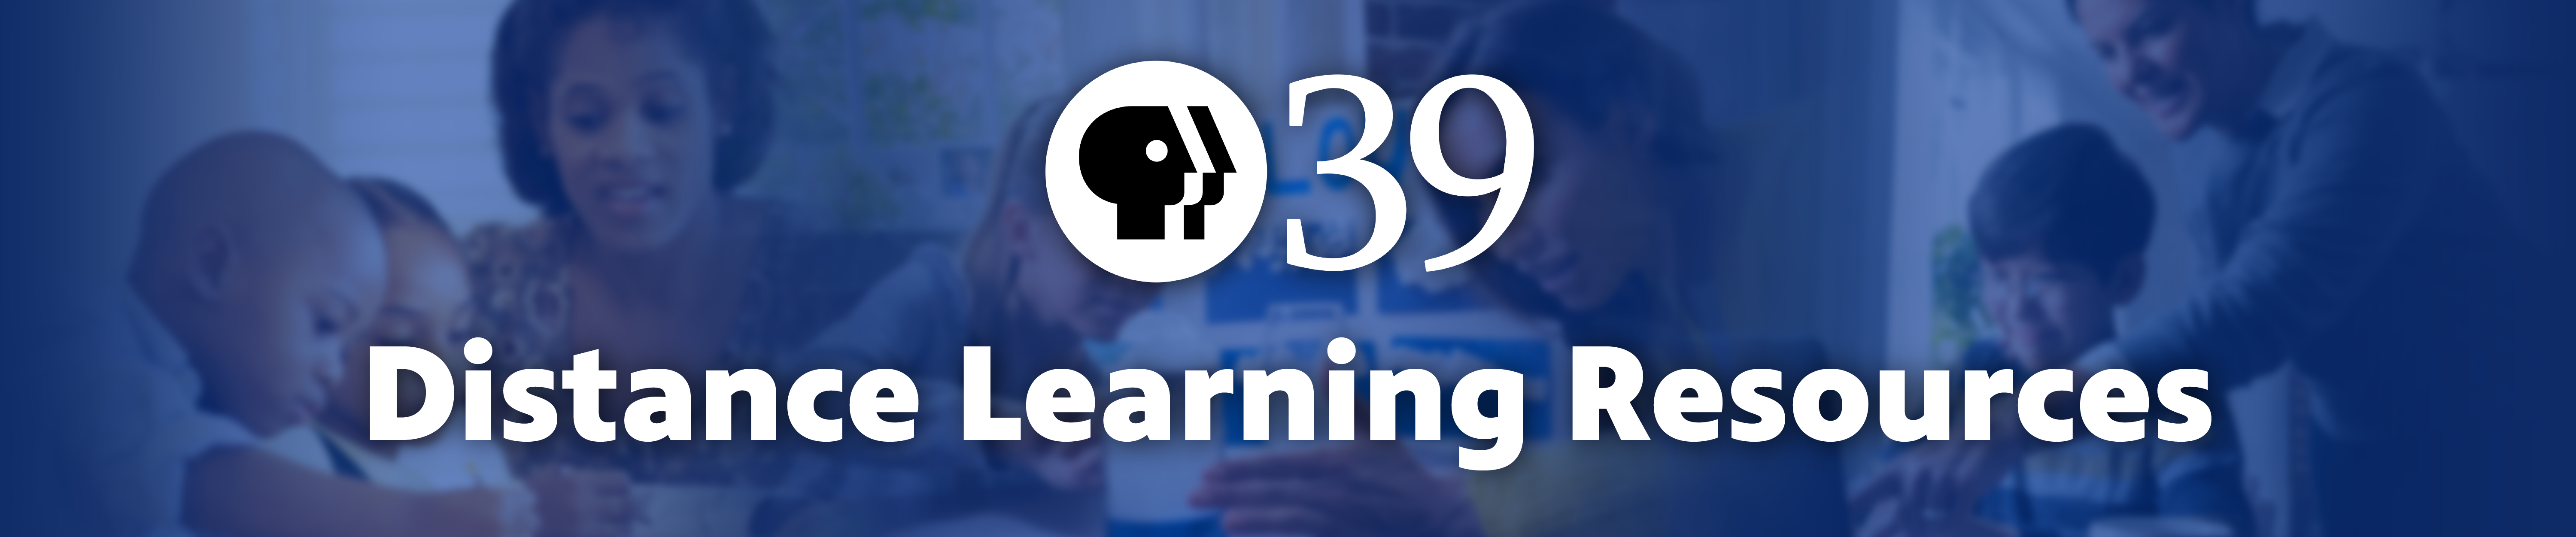 PBS39 Distance Learning